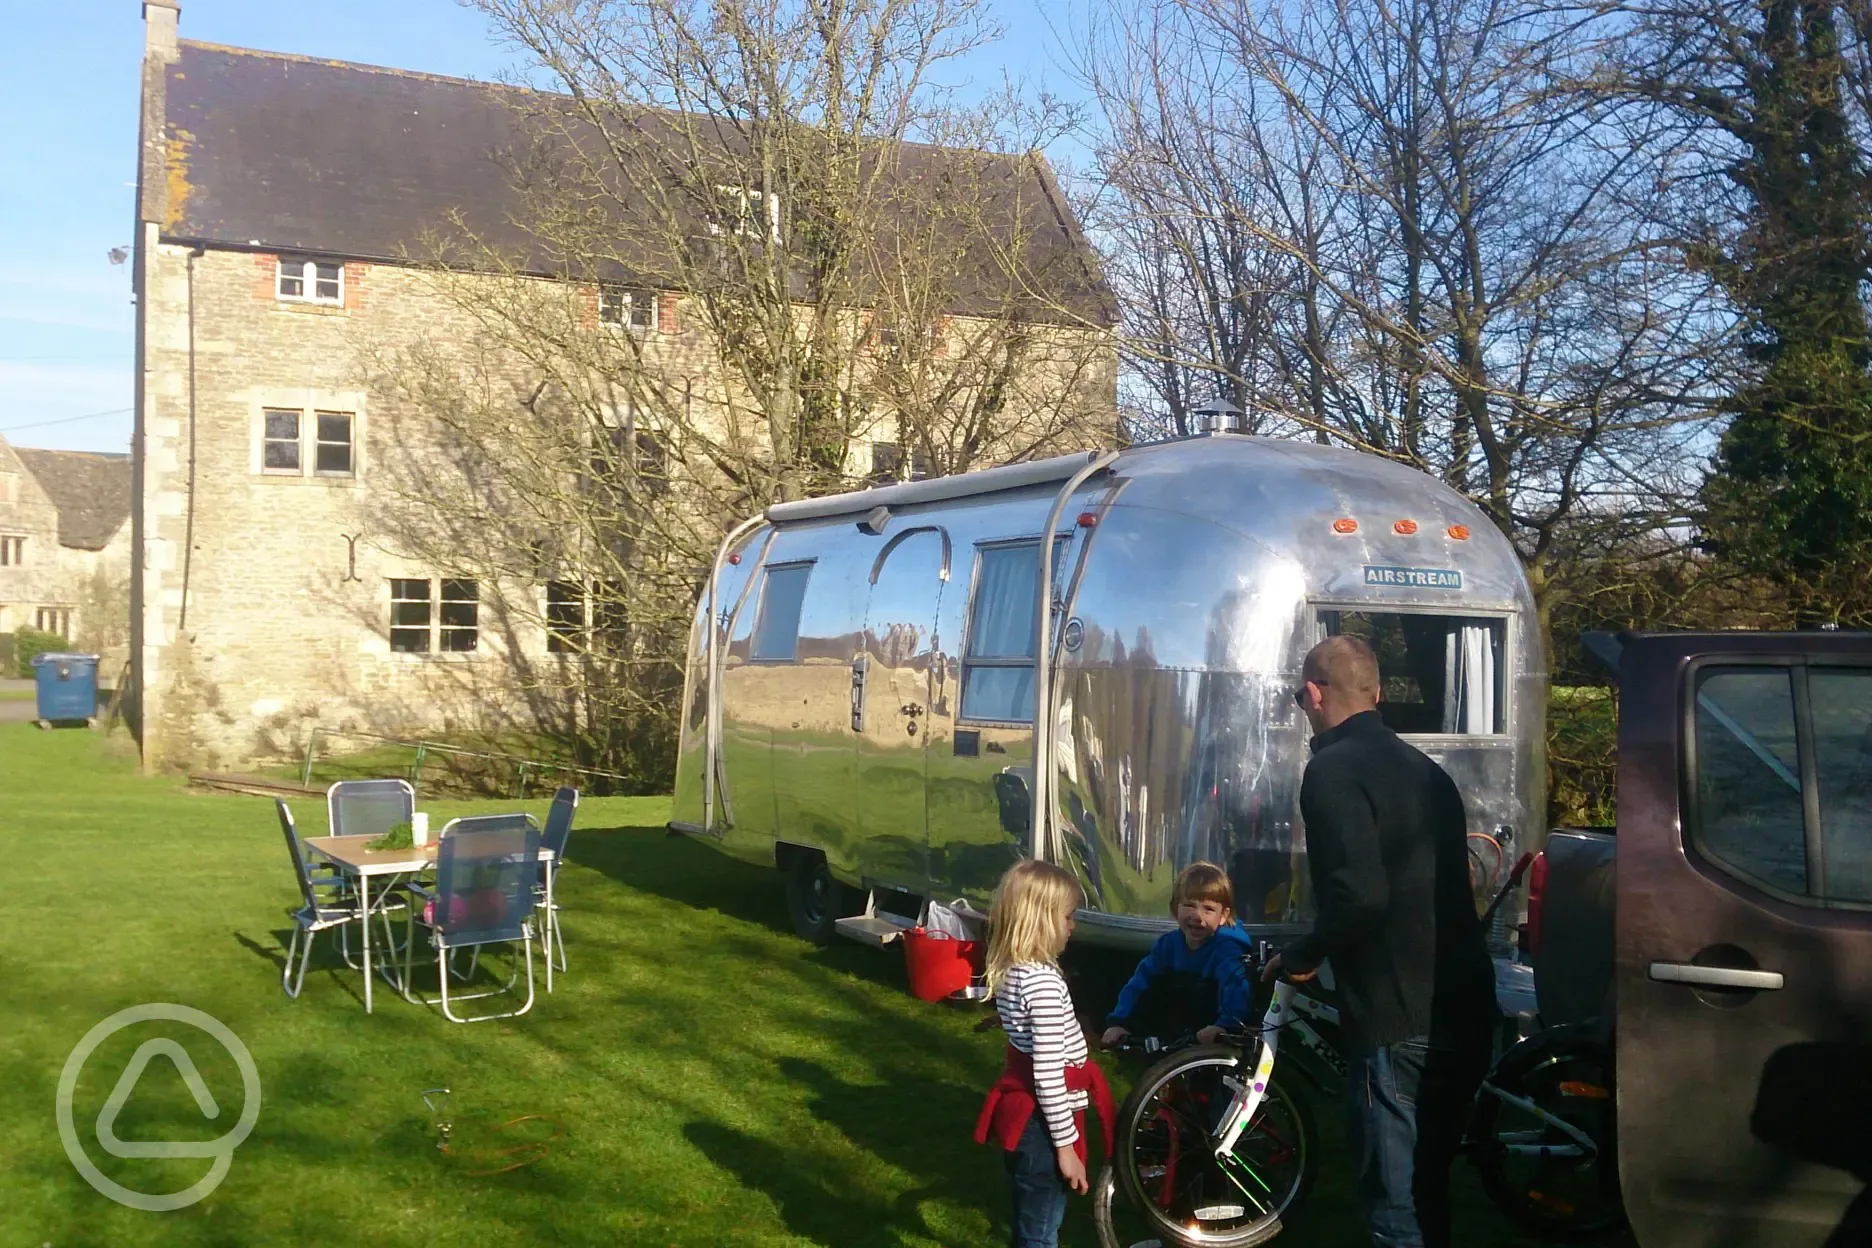 Main Site with Airstream